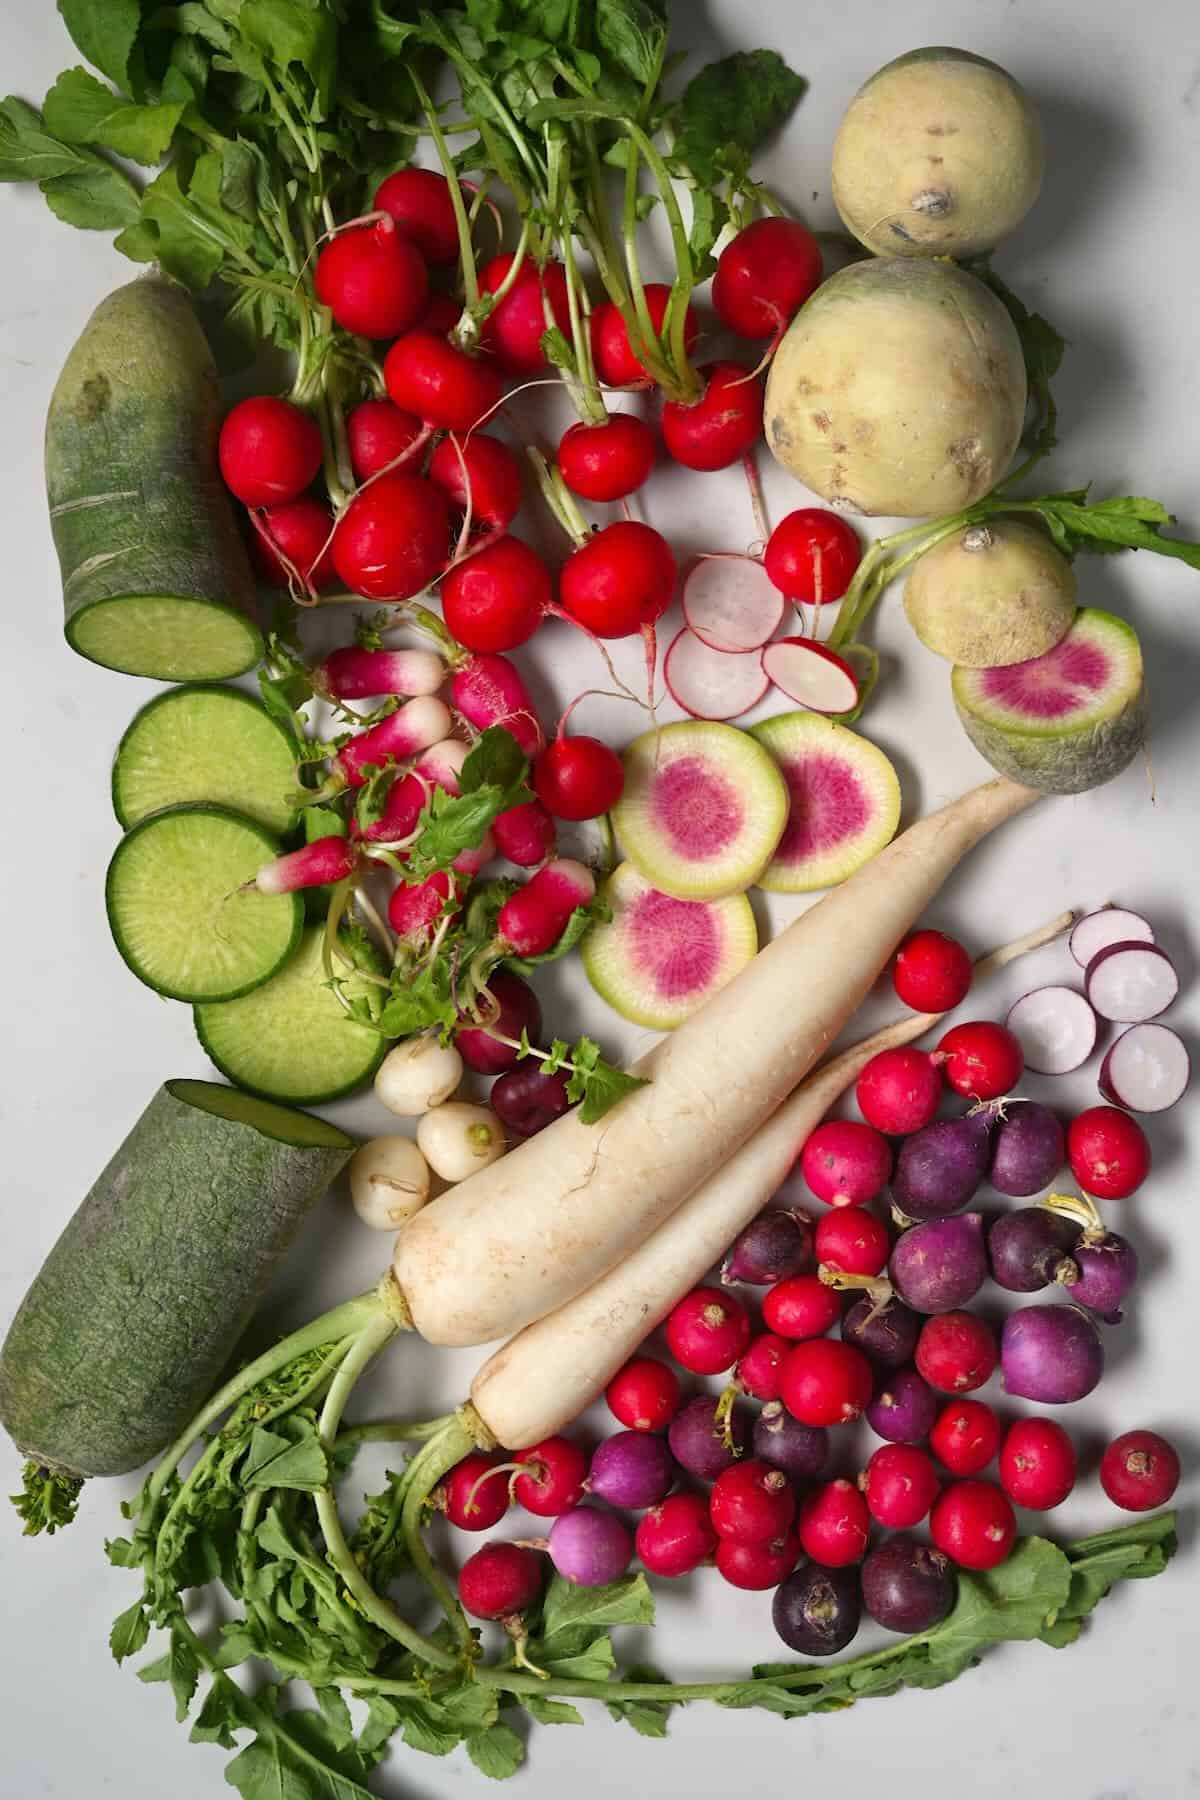 Different types of radishes on a flat surface